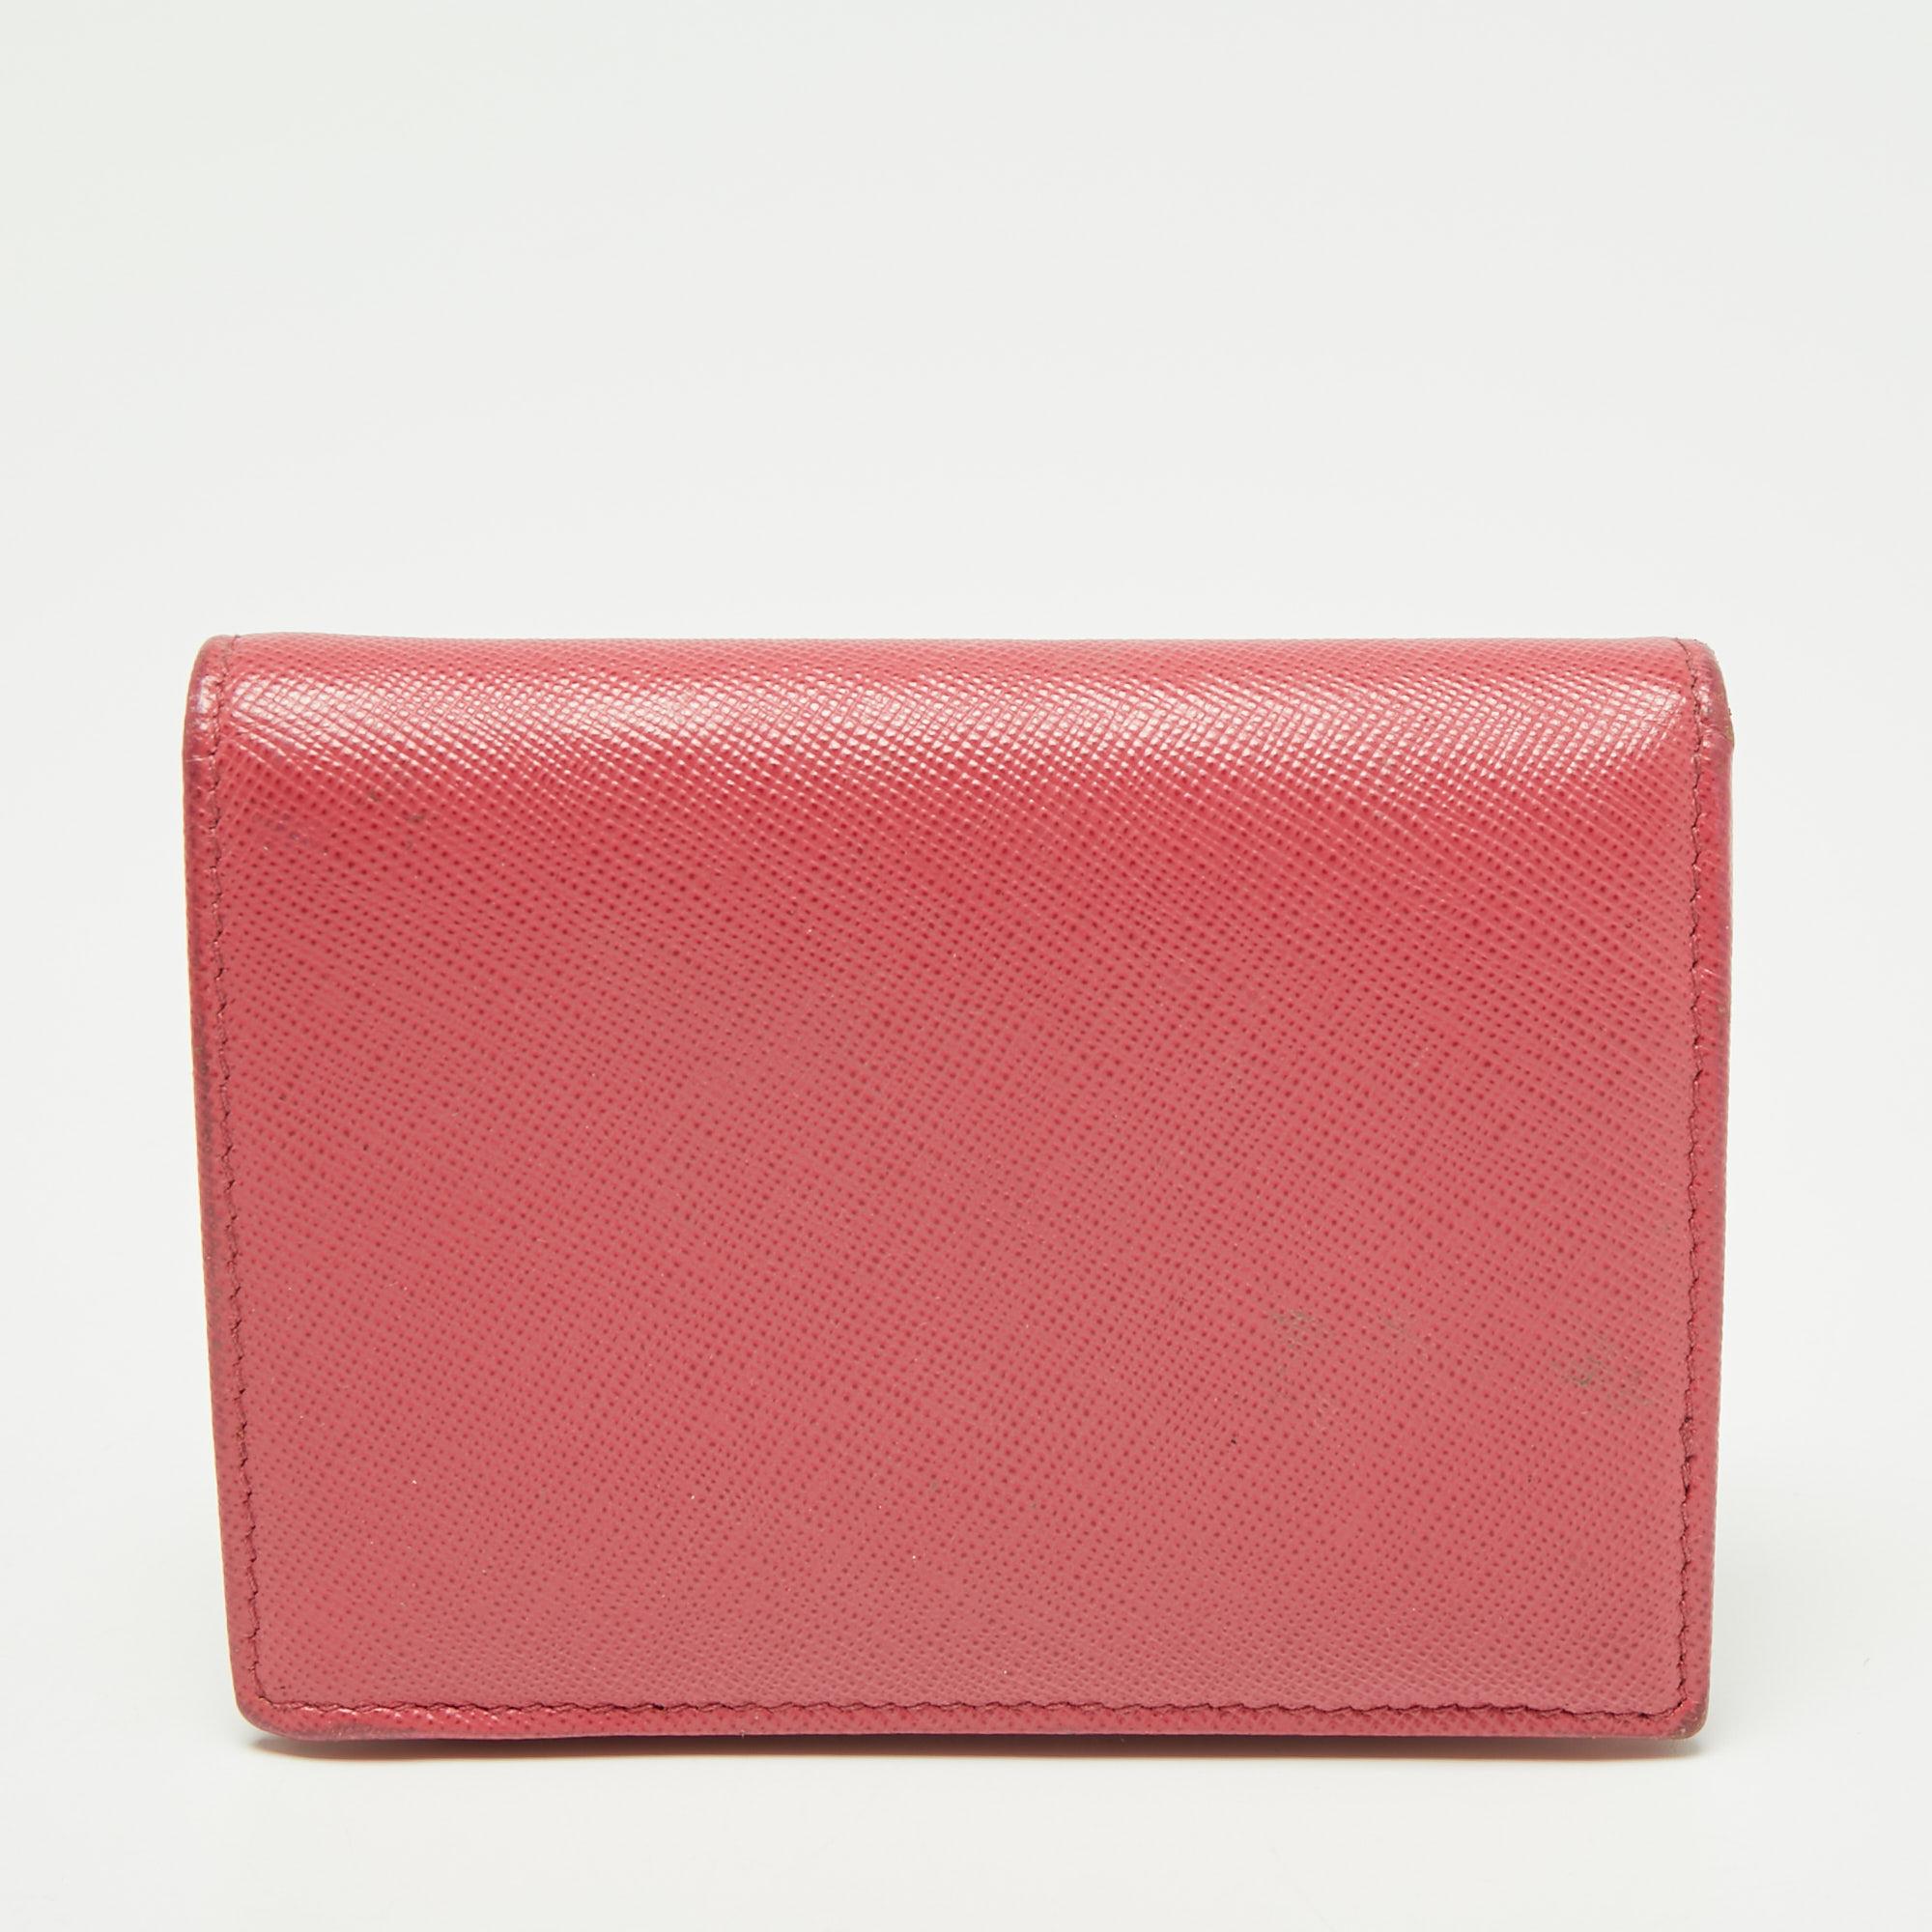 This card case from Prada will help you store your valuables securely. It is made from pink Saffiano leather and flaunts a logo lettering on the front. This bi-fold card case has gold-tone hardware and opens to a leather-nylon interior.

Includes: